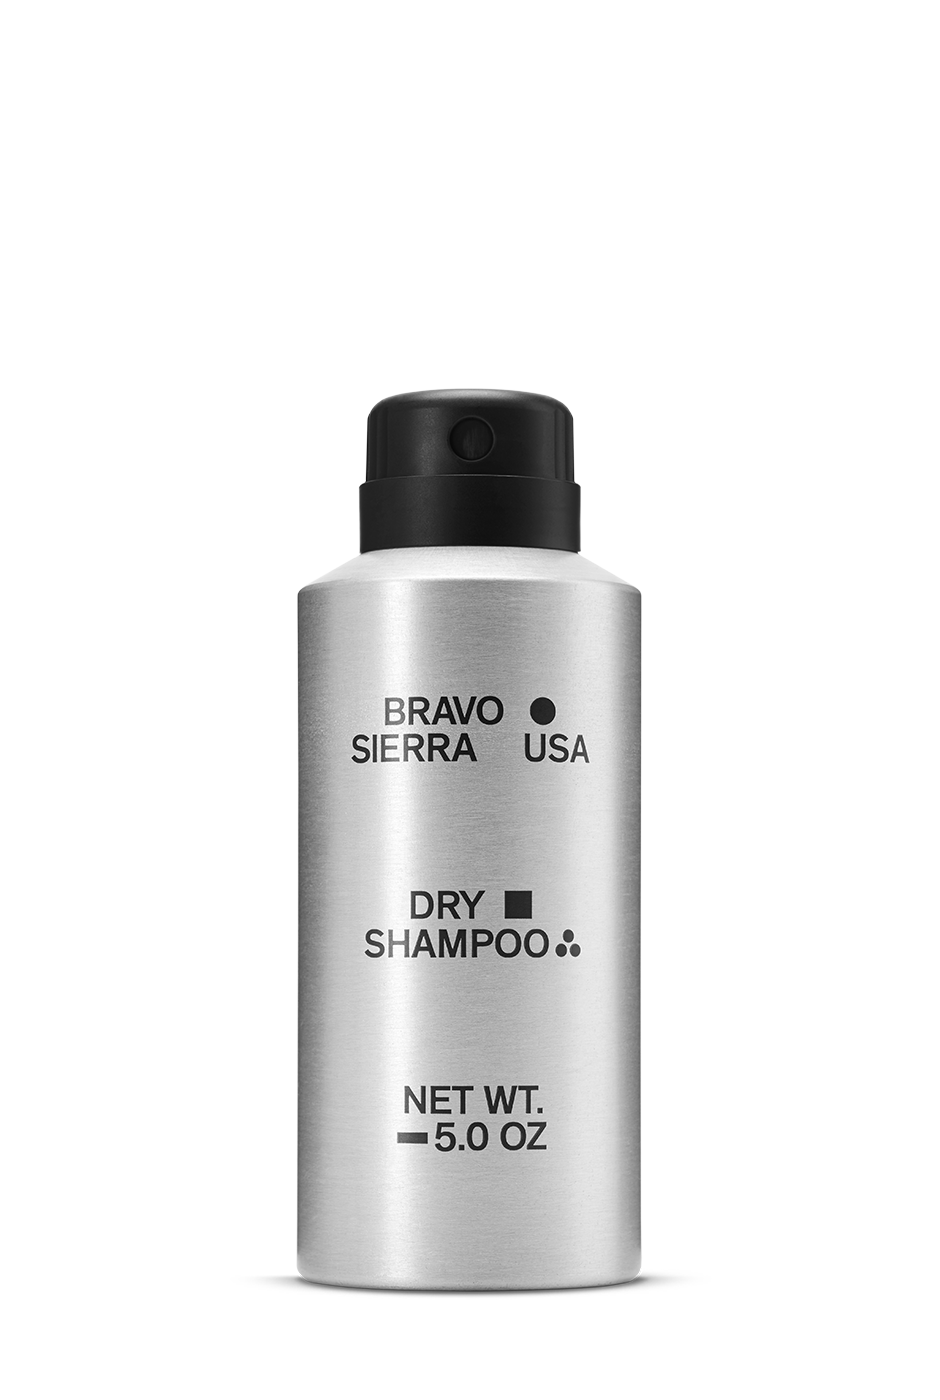 DRY SHAMPOO - Quick Clean, & Refreshing - No Water Needed